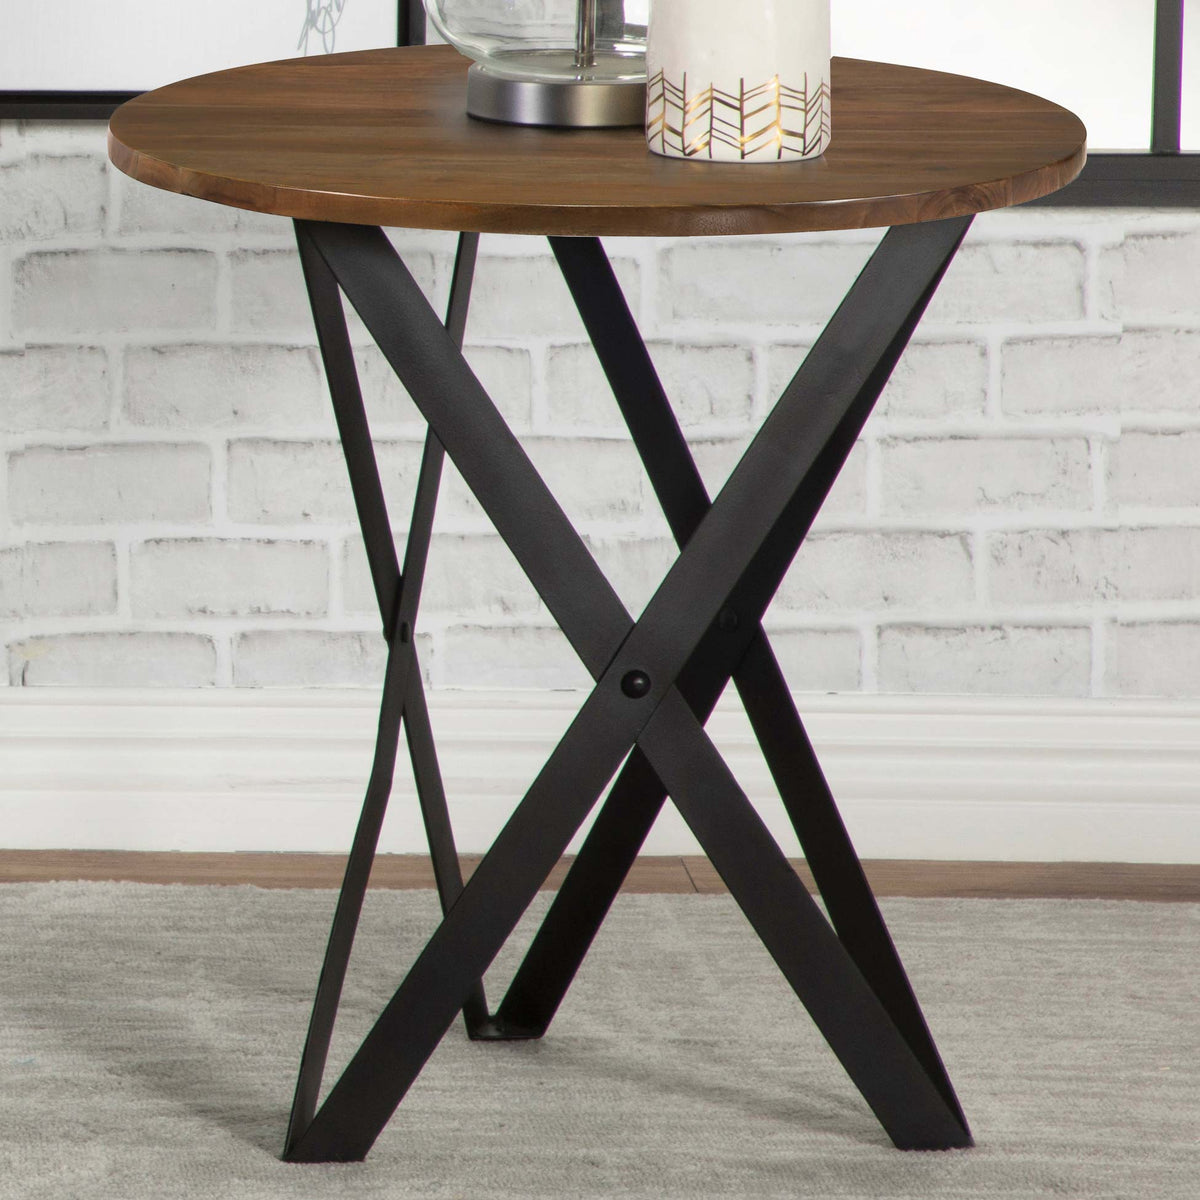 Zack Round End Table Smokey Grey and Black Zack Round End Table Smokey Grey and Black Half Price Furniture